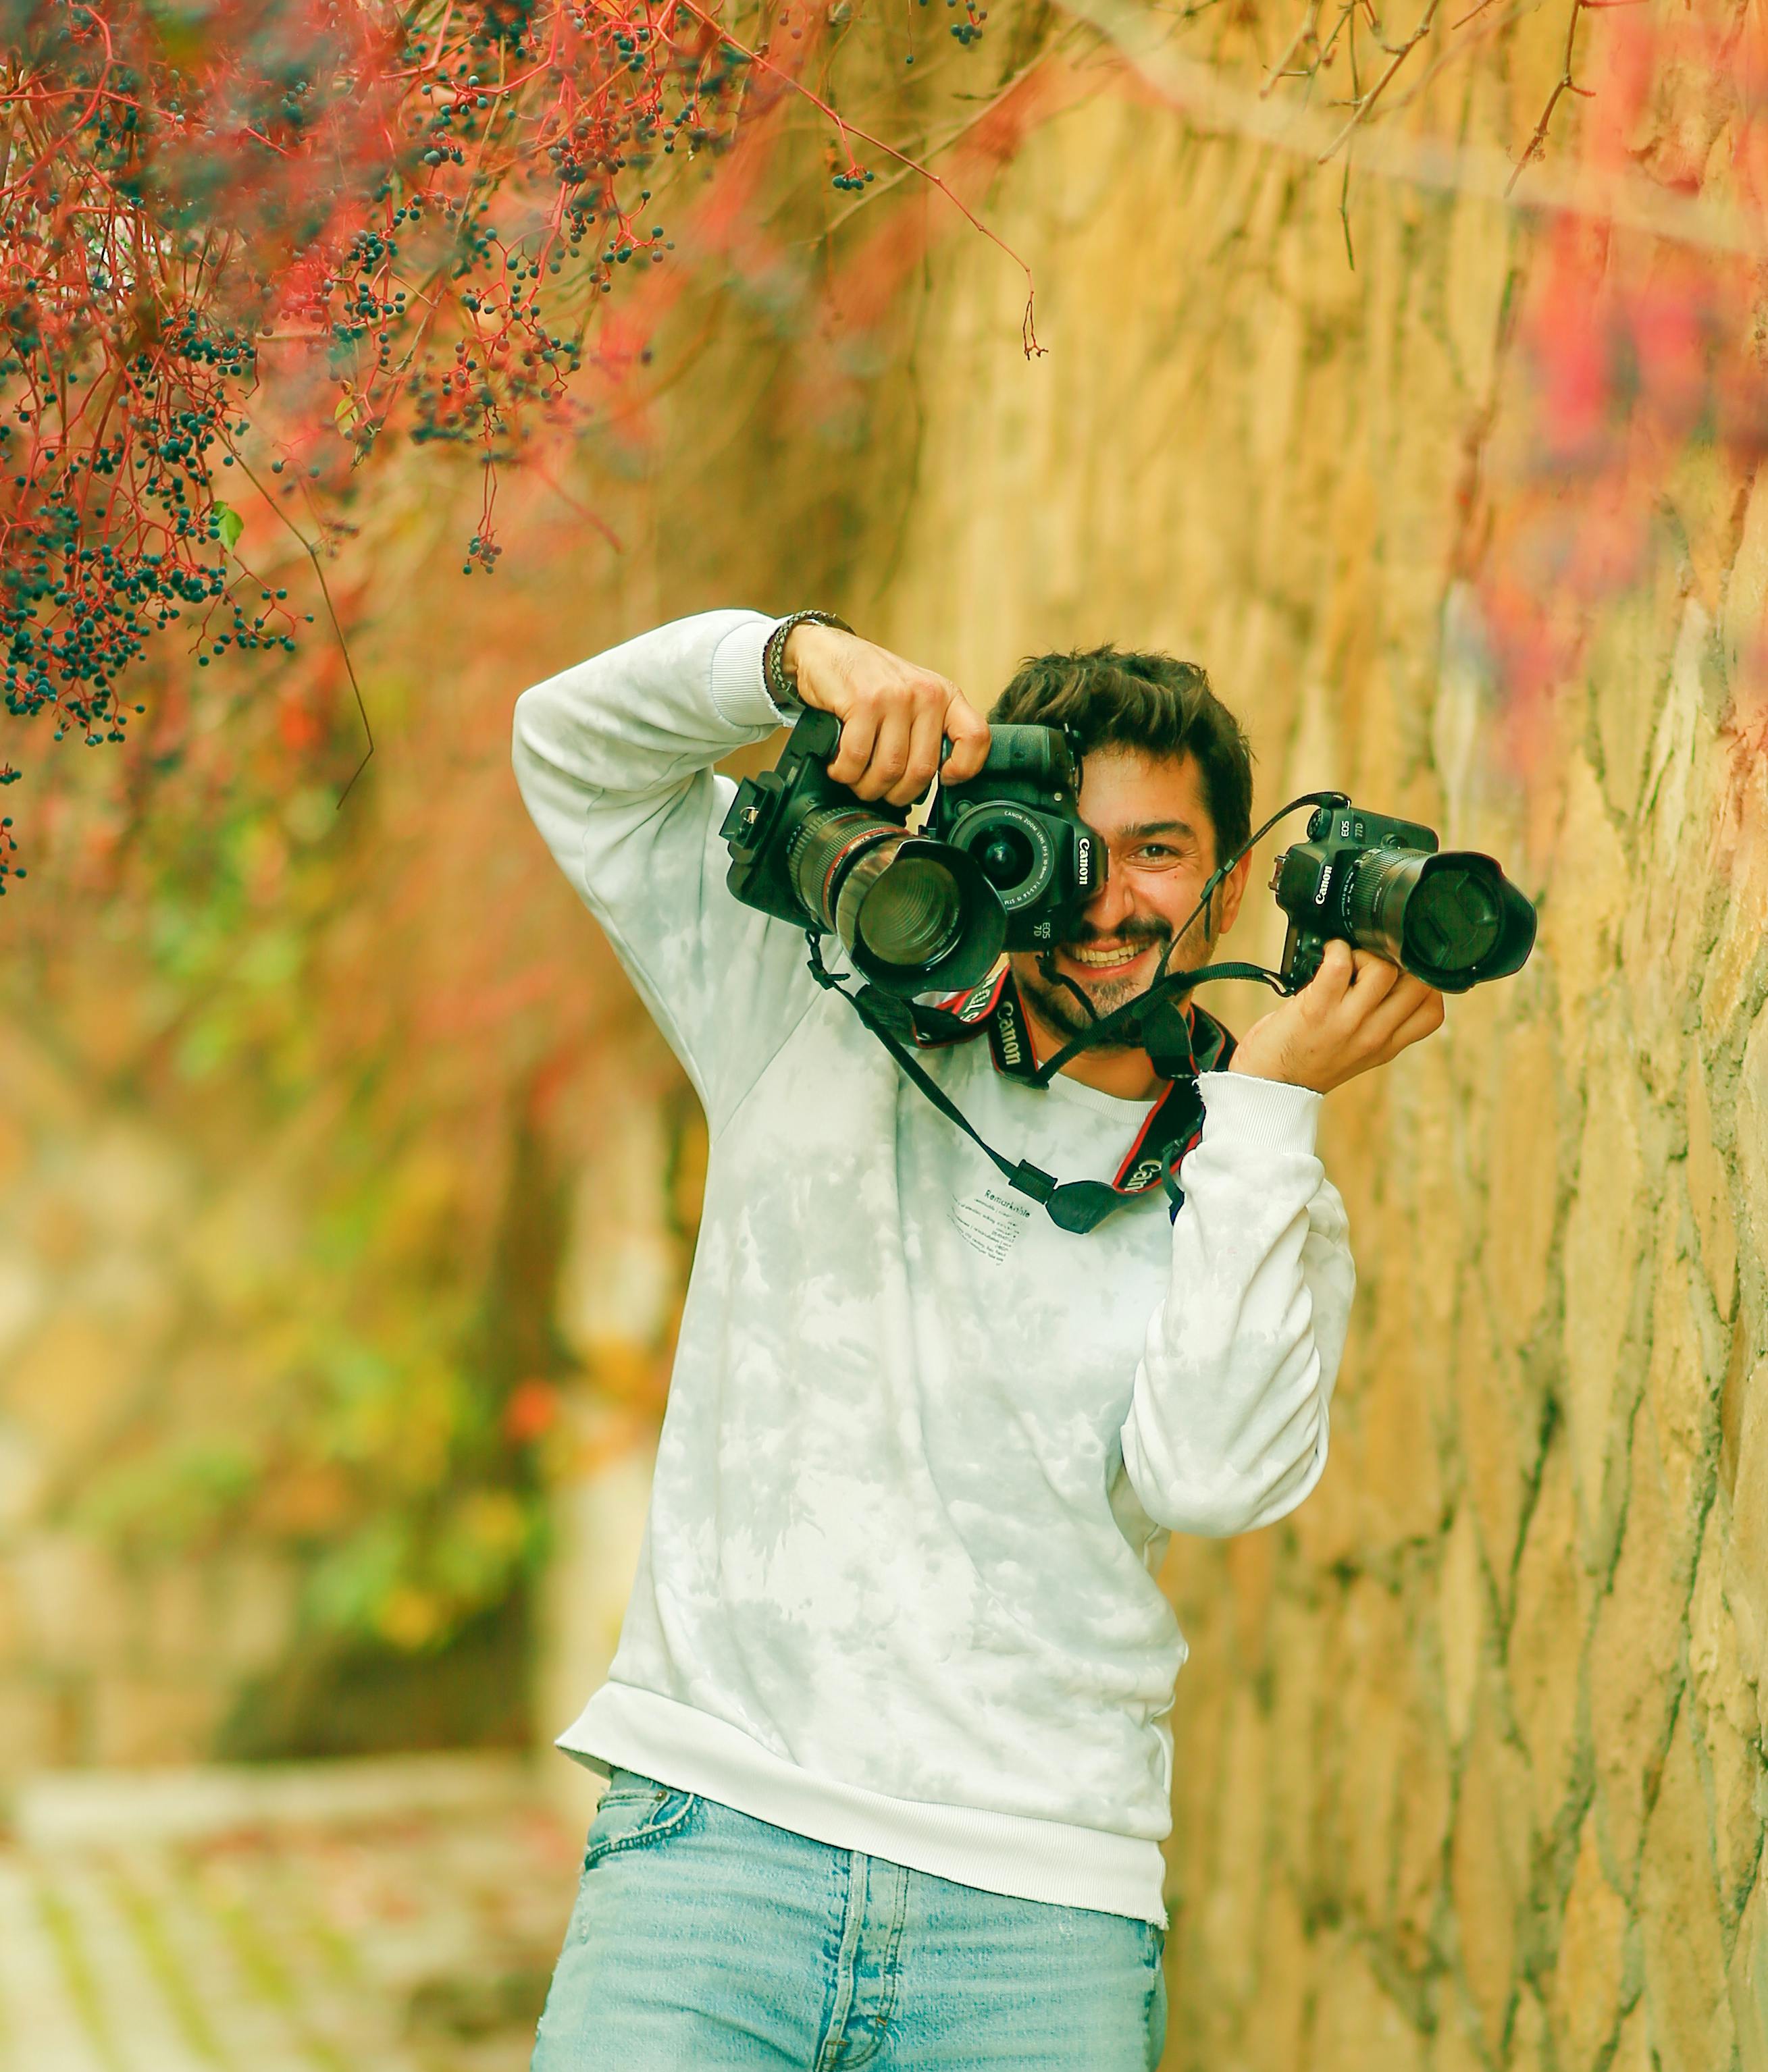 Creative Poses for Boys | Photography with DSLR